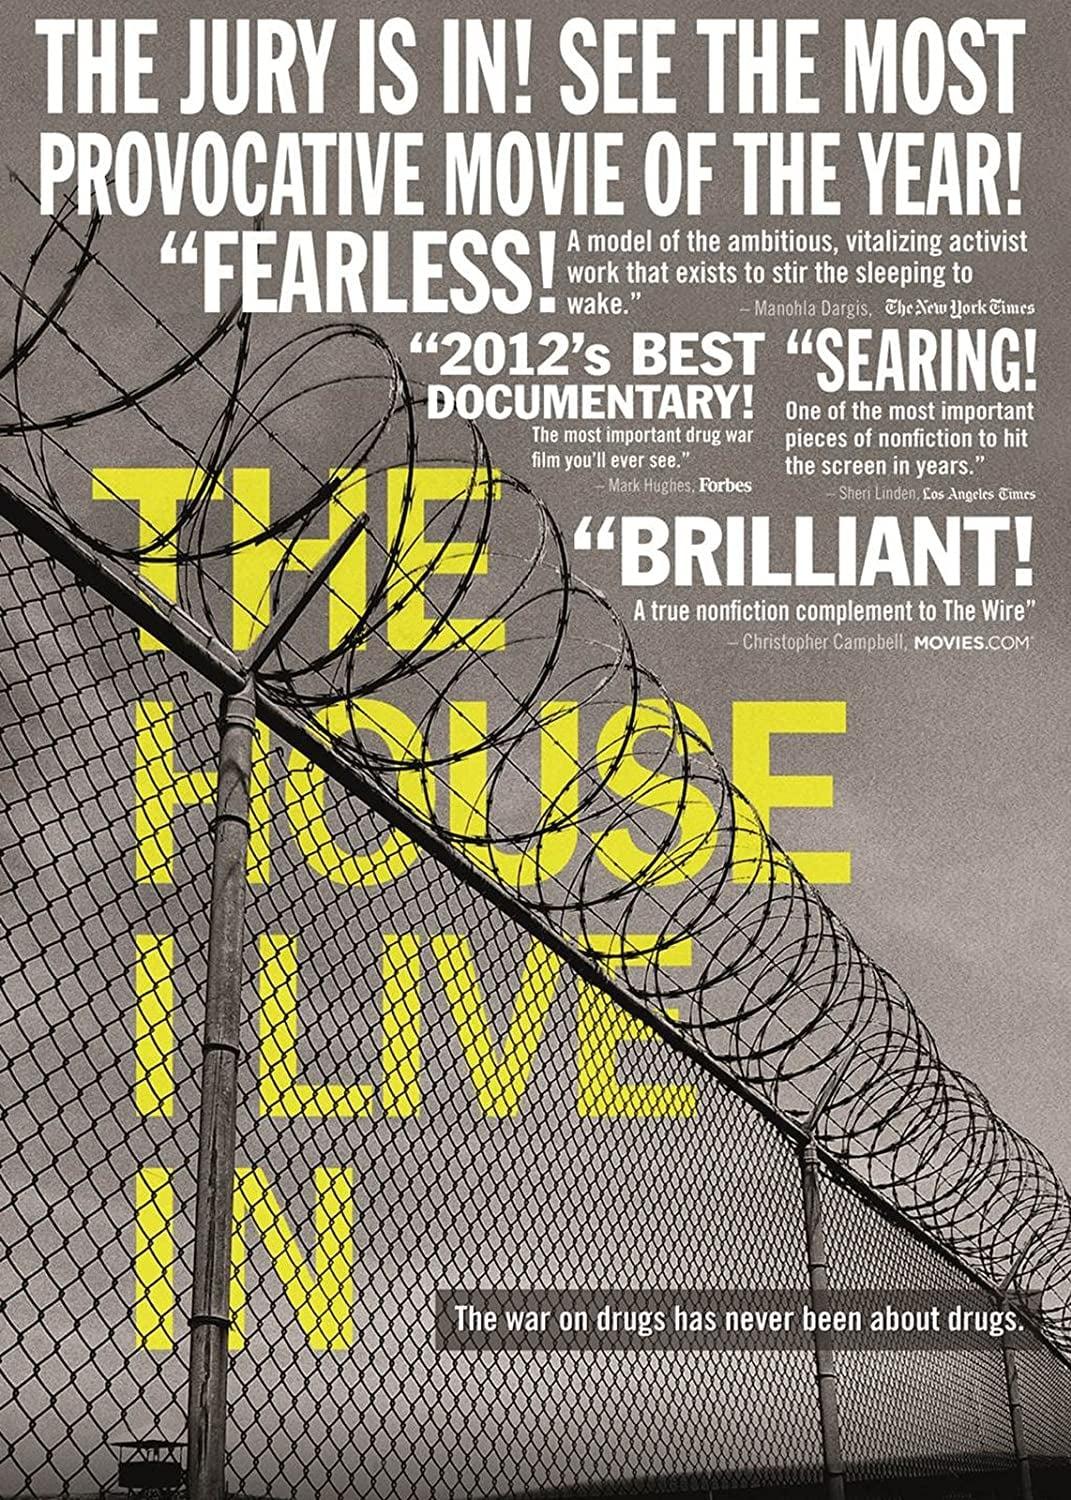 The House I Live In poster